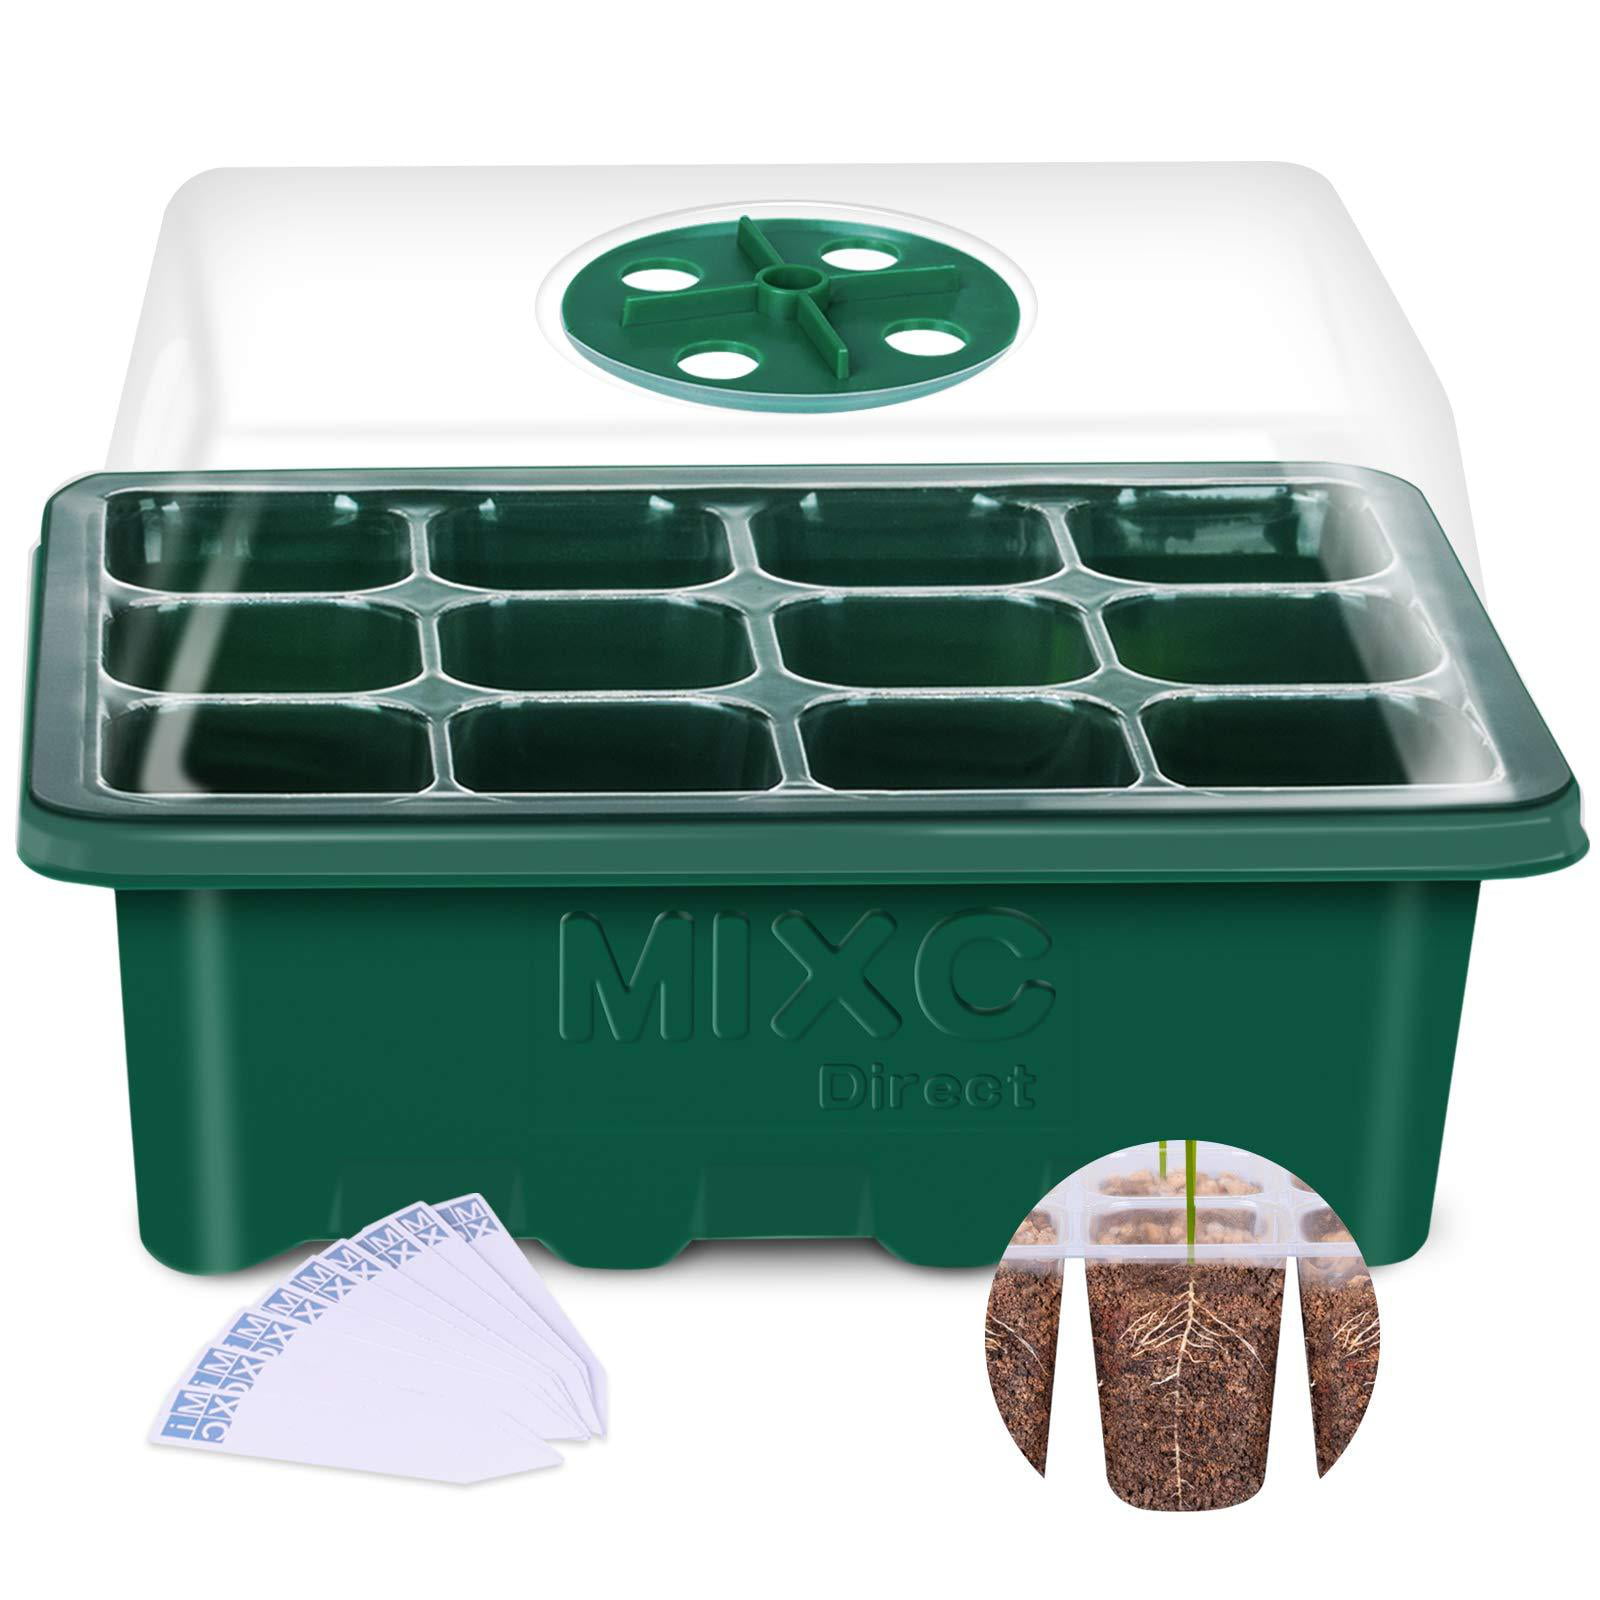 EXTRA LARGE PROPAGATOR Garden Starter Kit Hydroponic Greenhouse Sowing Planting 